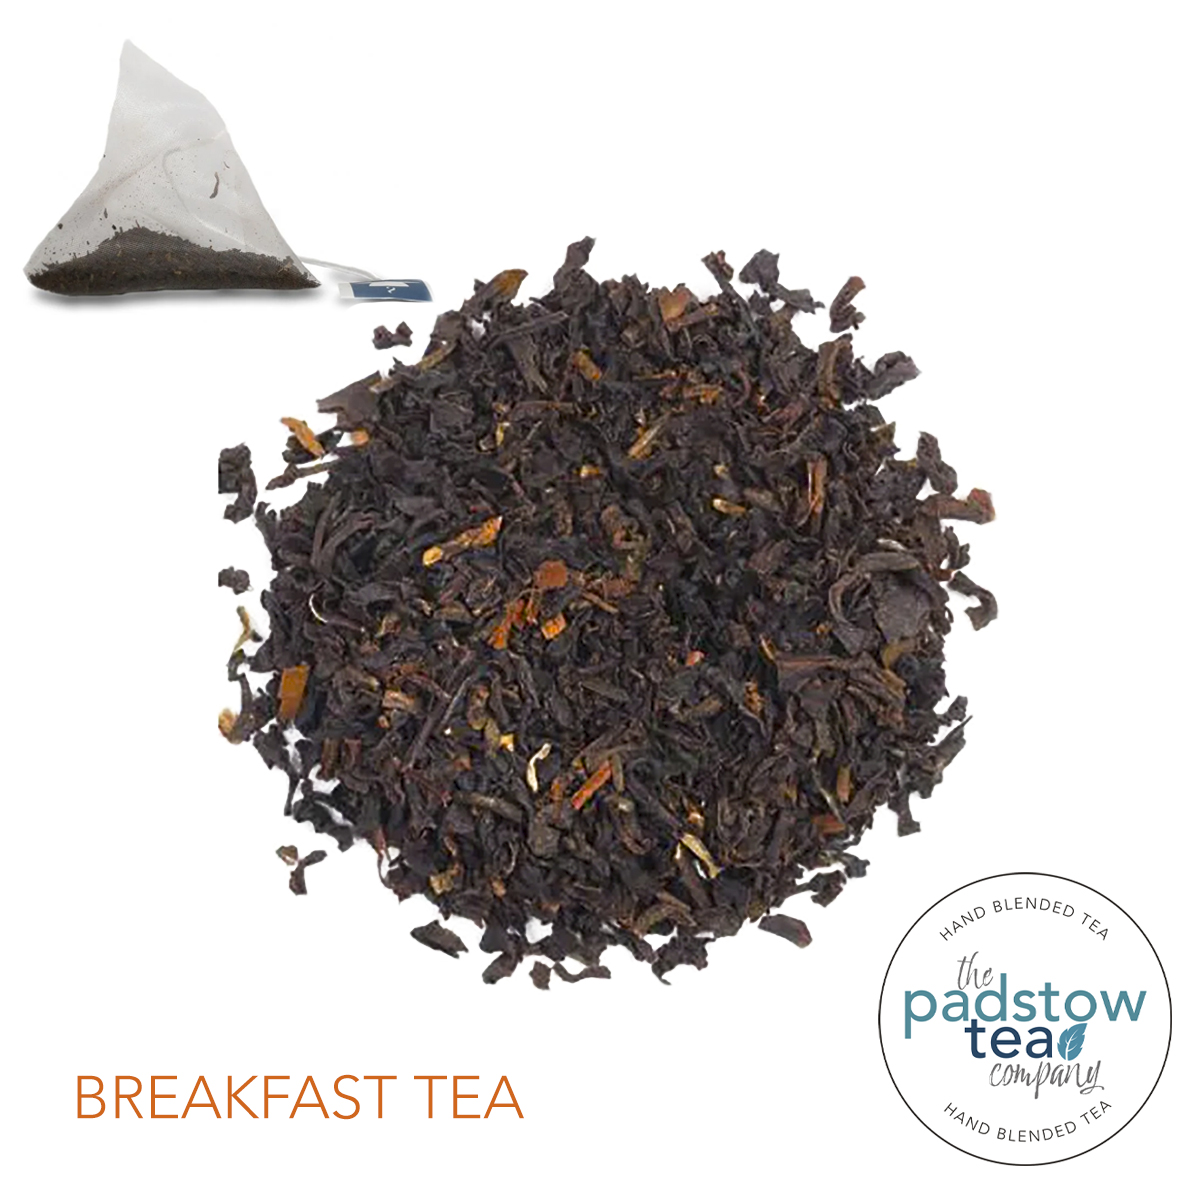 It’s the first day of #Autumn and the #weekend as well!
So what better place to start our journey through The Padstow Tea Company’s #teas than with our invigorating loose leaf #BreakfastTea
Perfect any time of the day.
#Tea #infusions
thepadstowteacompany.co.uk/product-page/b…